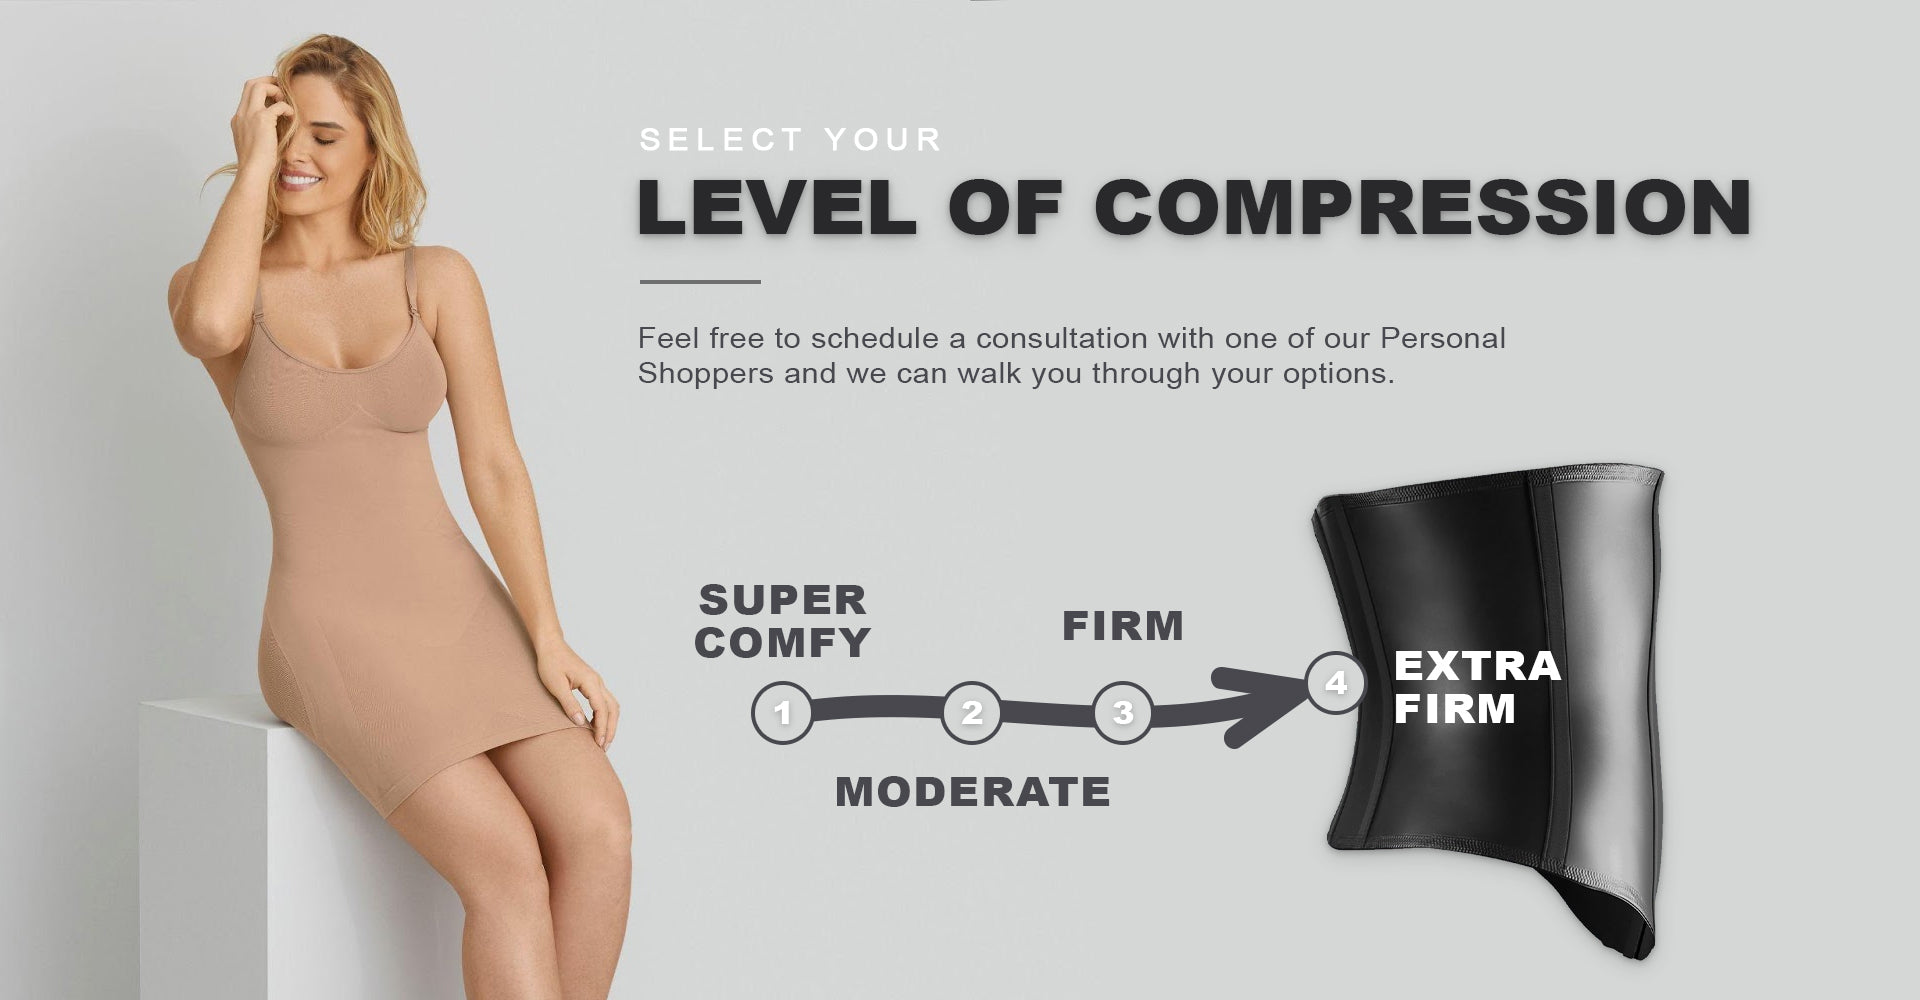 Select your level of compression